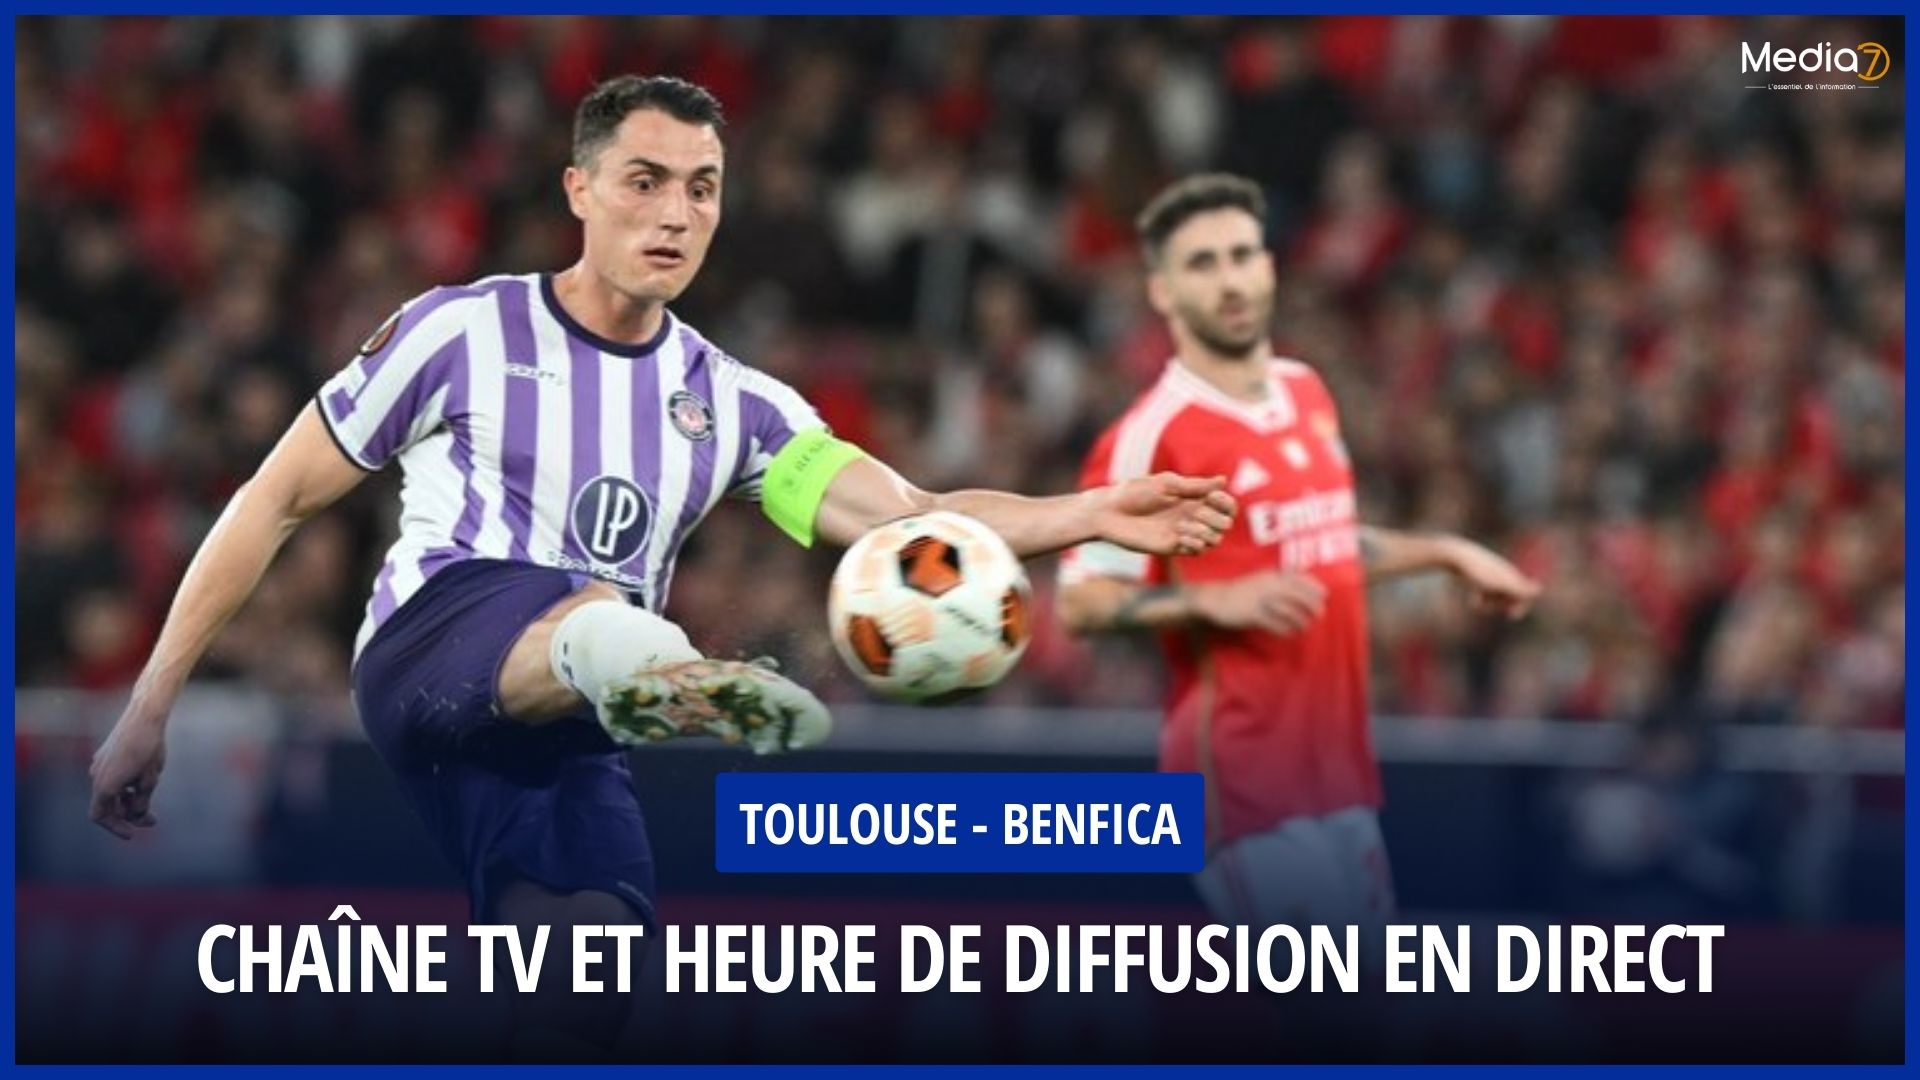 Toulouse - Benfica Match Live: TV Broadcast & Streaming, Schedule - Media7